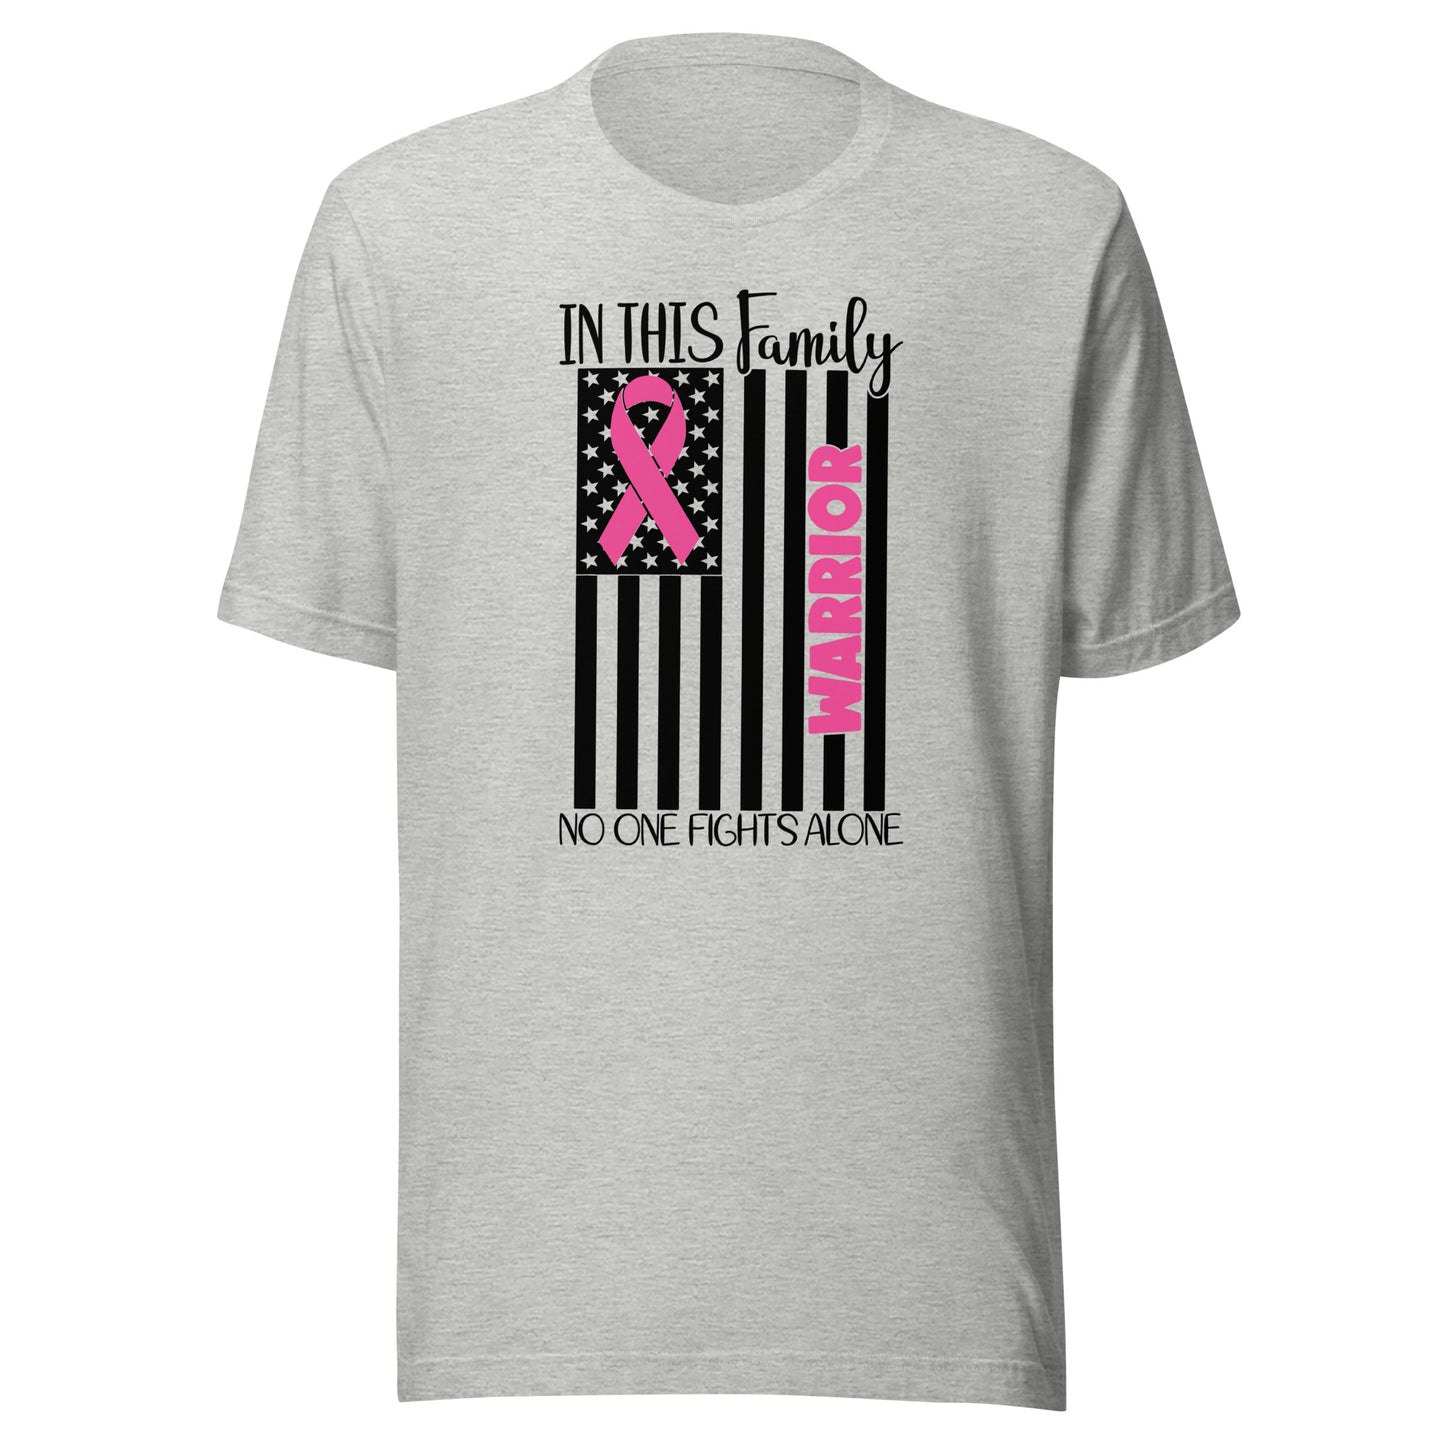 Nobody Fights Alone - Breast Cancer Awareness Pink Cancer Ribbon Flag Unisex T-shirt